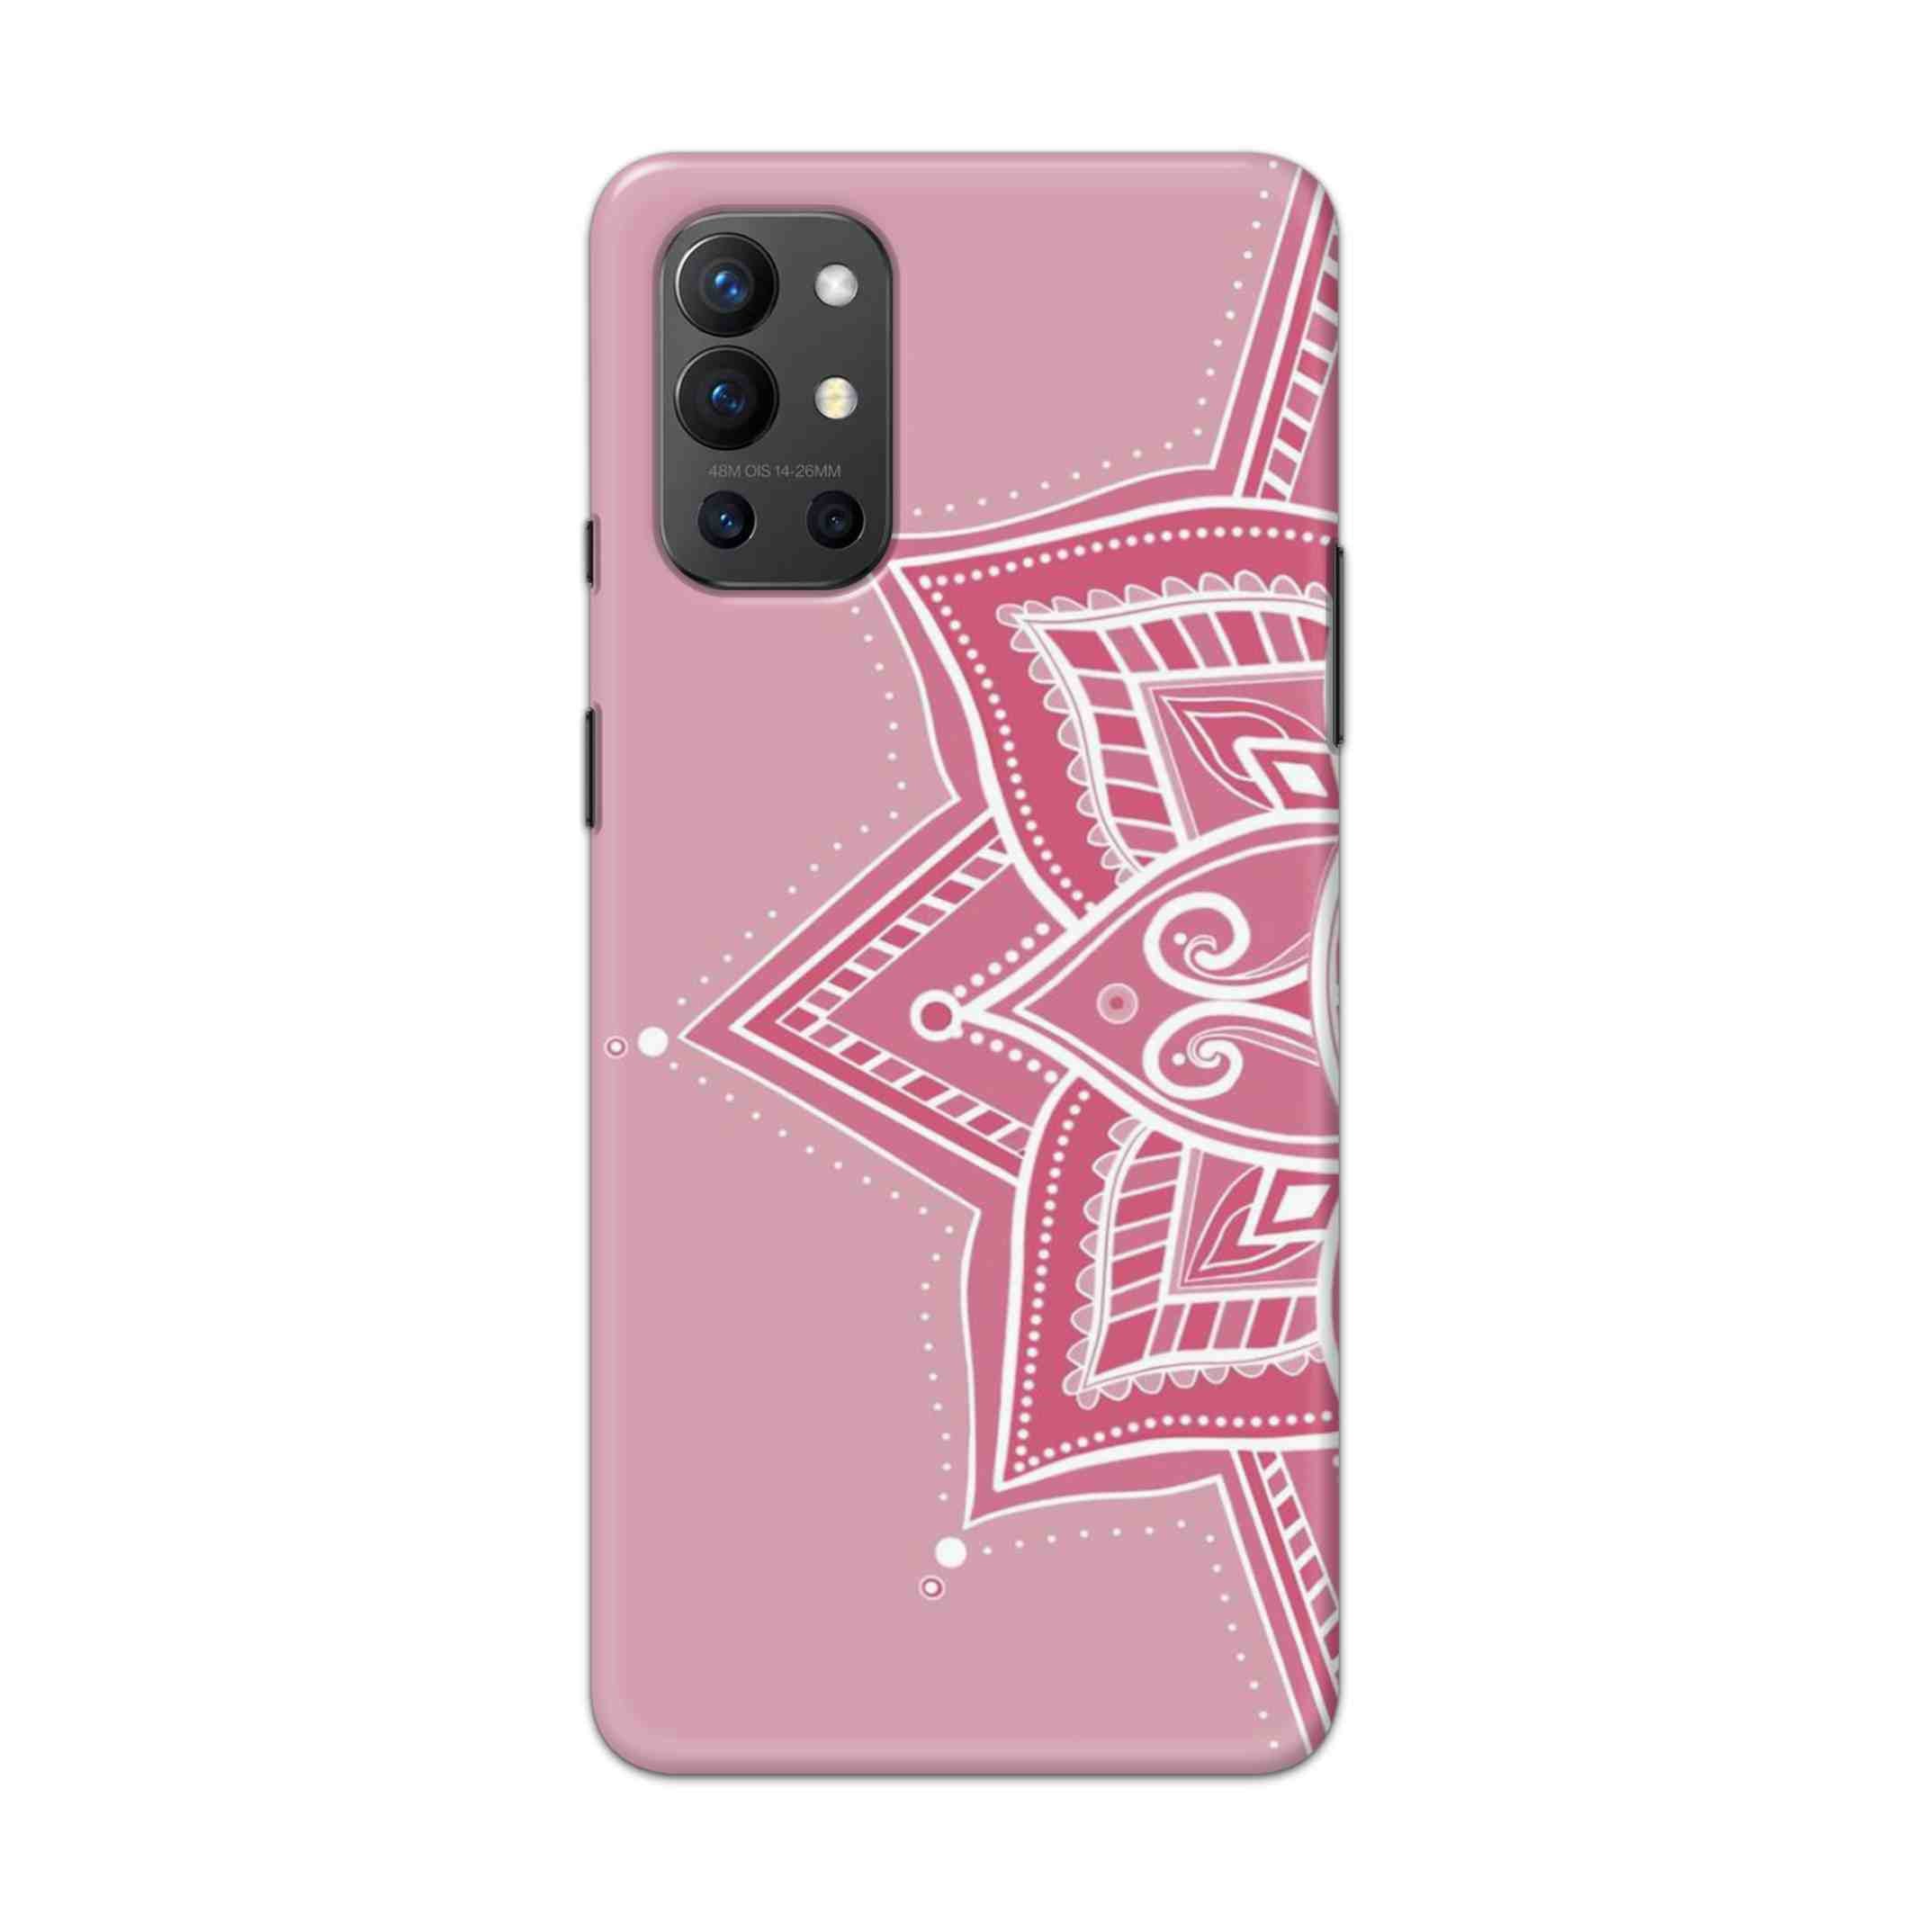 Buy Pink Rangoli Hard Back Mobile Phone Case Cover For OnePlus 9R / 8T Online